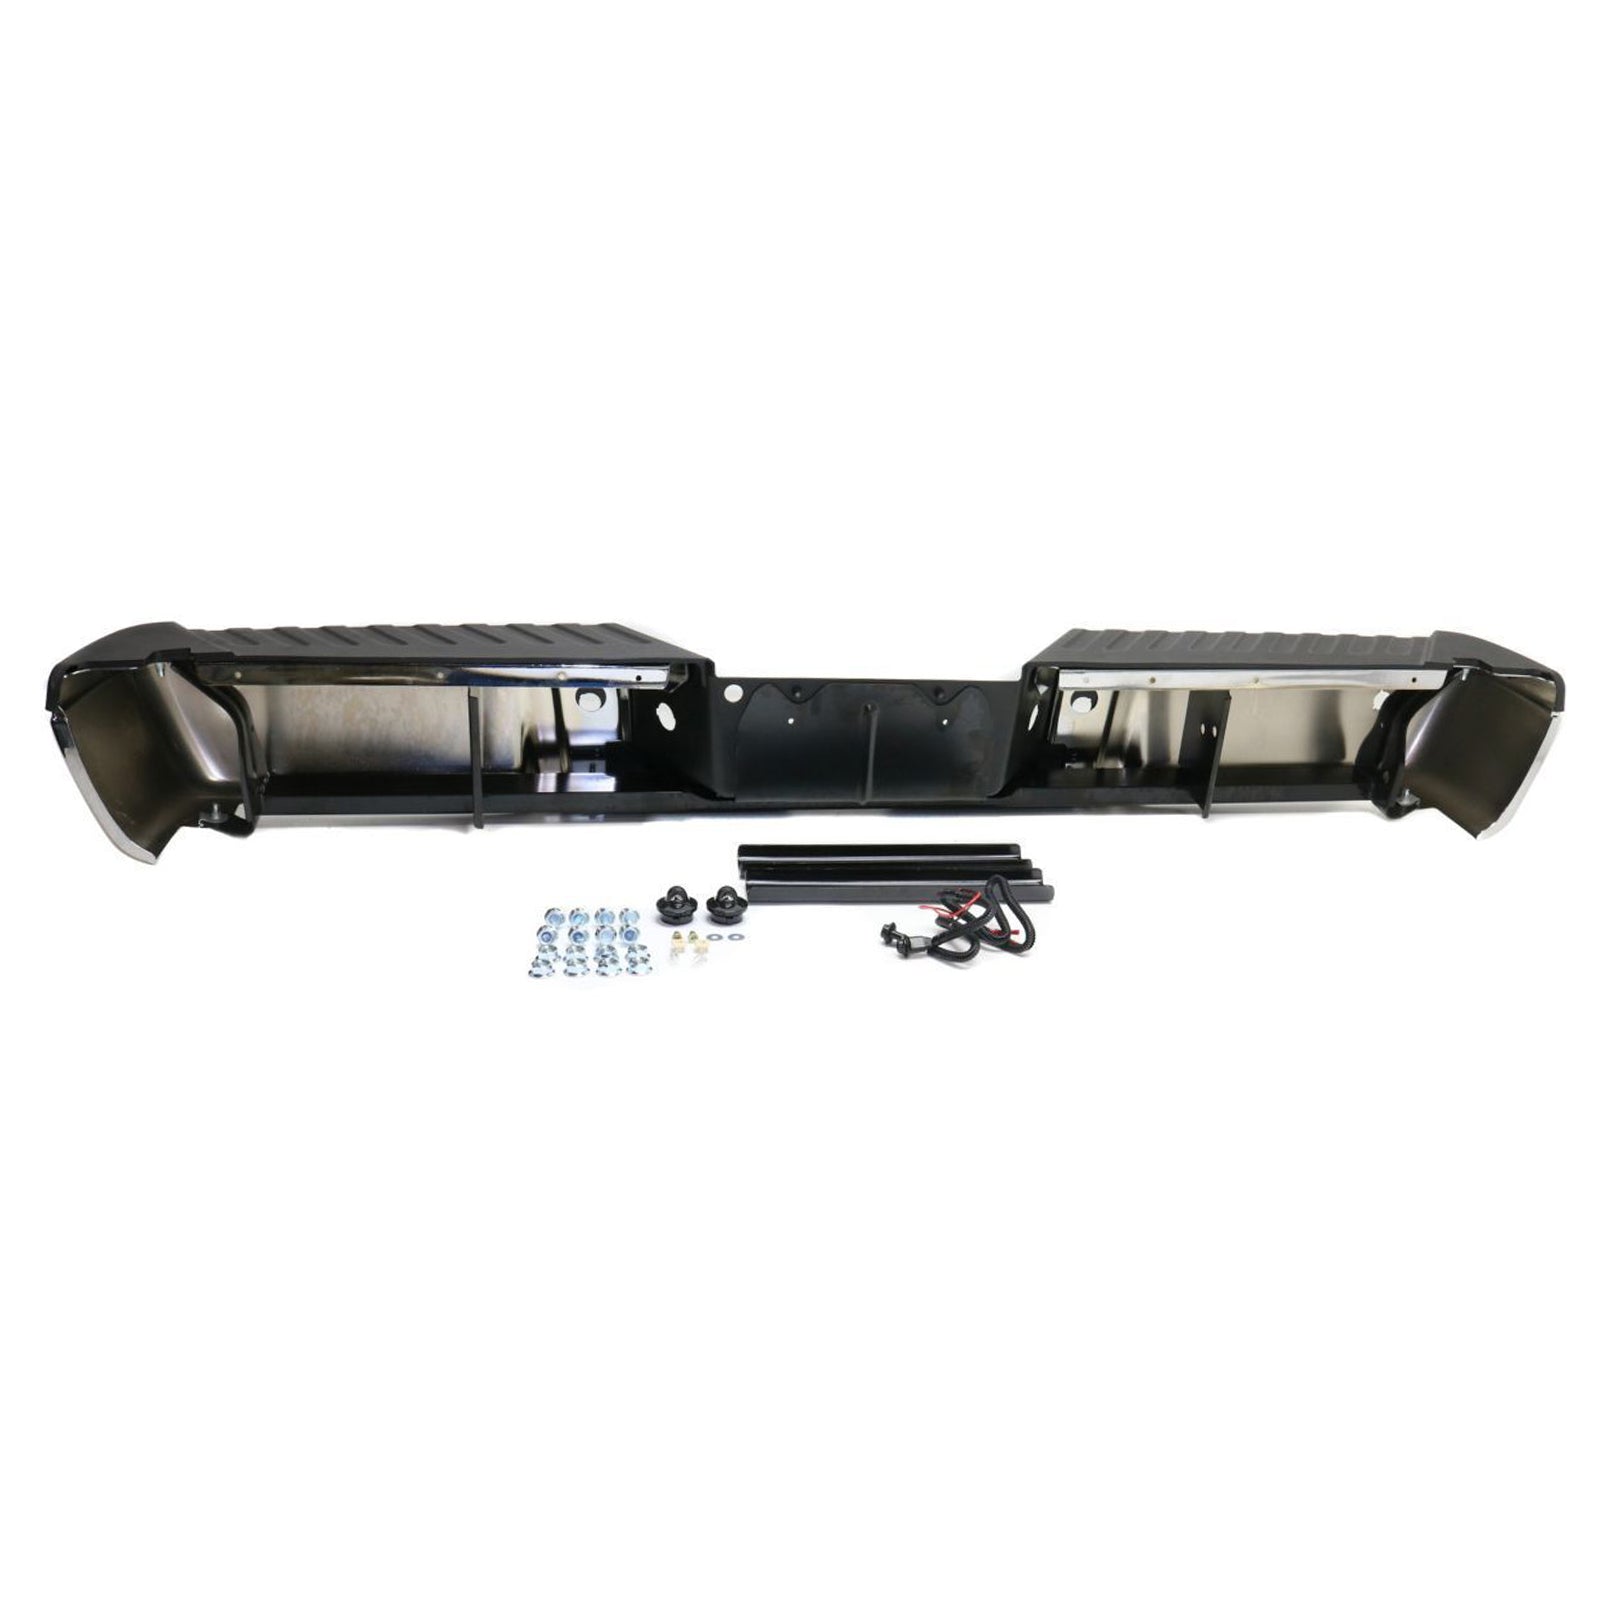 Ford Superduty 2013 - 2016 Rear Chrome Bumper Assembly 13 - 16 FO1103177 Bumper-King